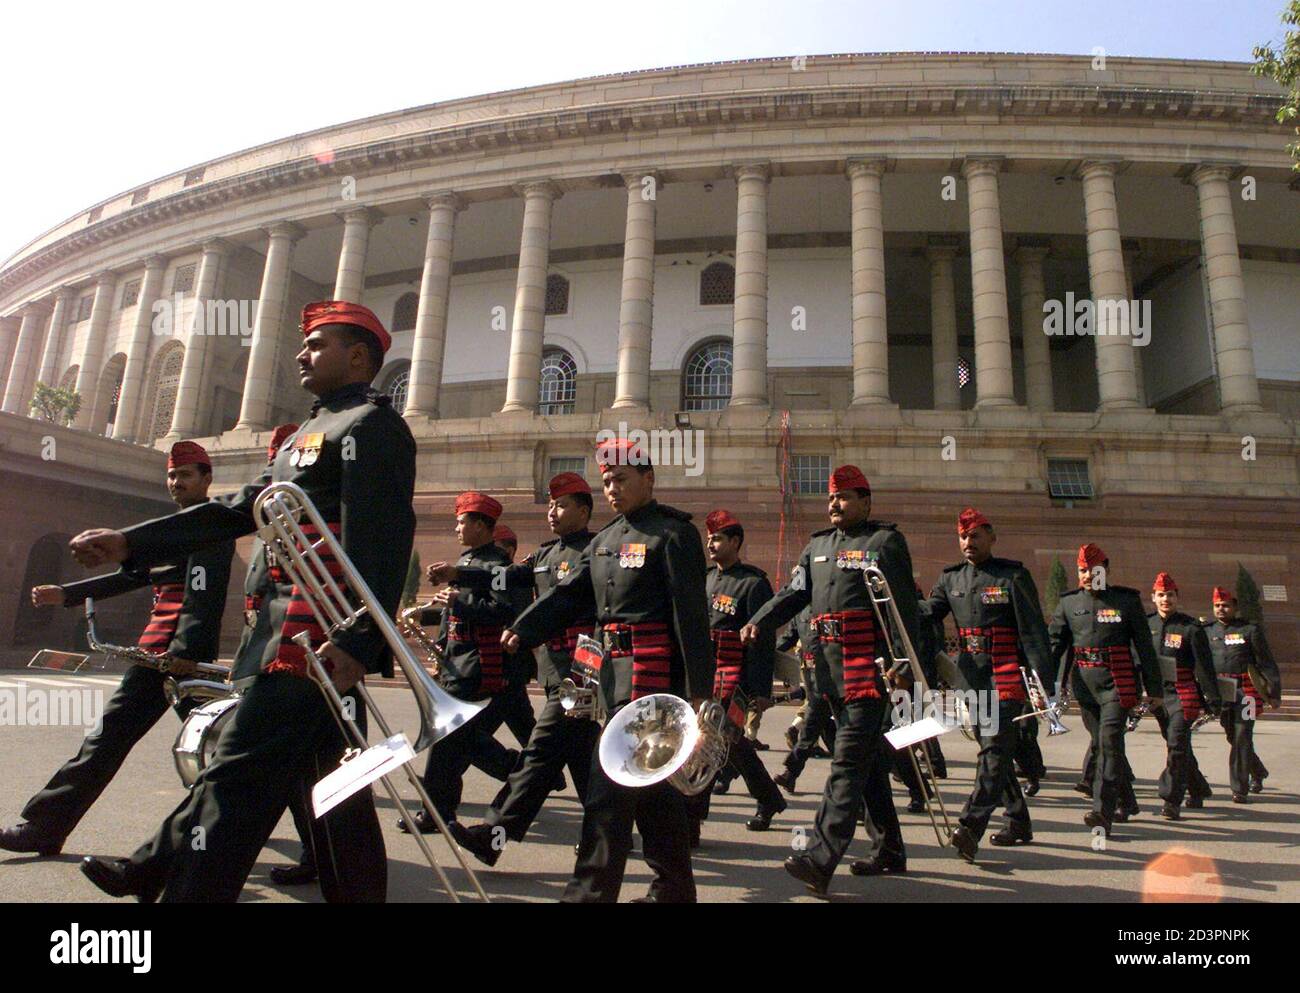 Soldiers from the Infantry Band from Jammu and Kashmir leave after their performance at the parliament building in New Delhi January 22, 2003. The Indian Parliament's, which was created by British designer Sir Edward Lutyens celebrated its golden jubilee on Wednesday with a release of book on the subject and military bands taking part in the celebrations. REUTERS/Kamal Kishore  JSG/ Stock Photo